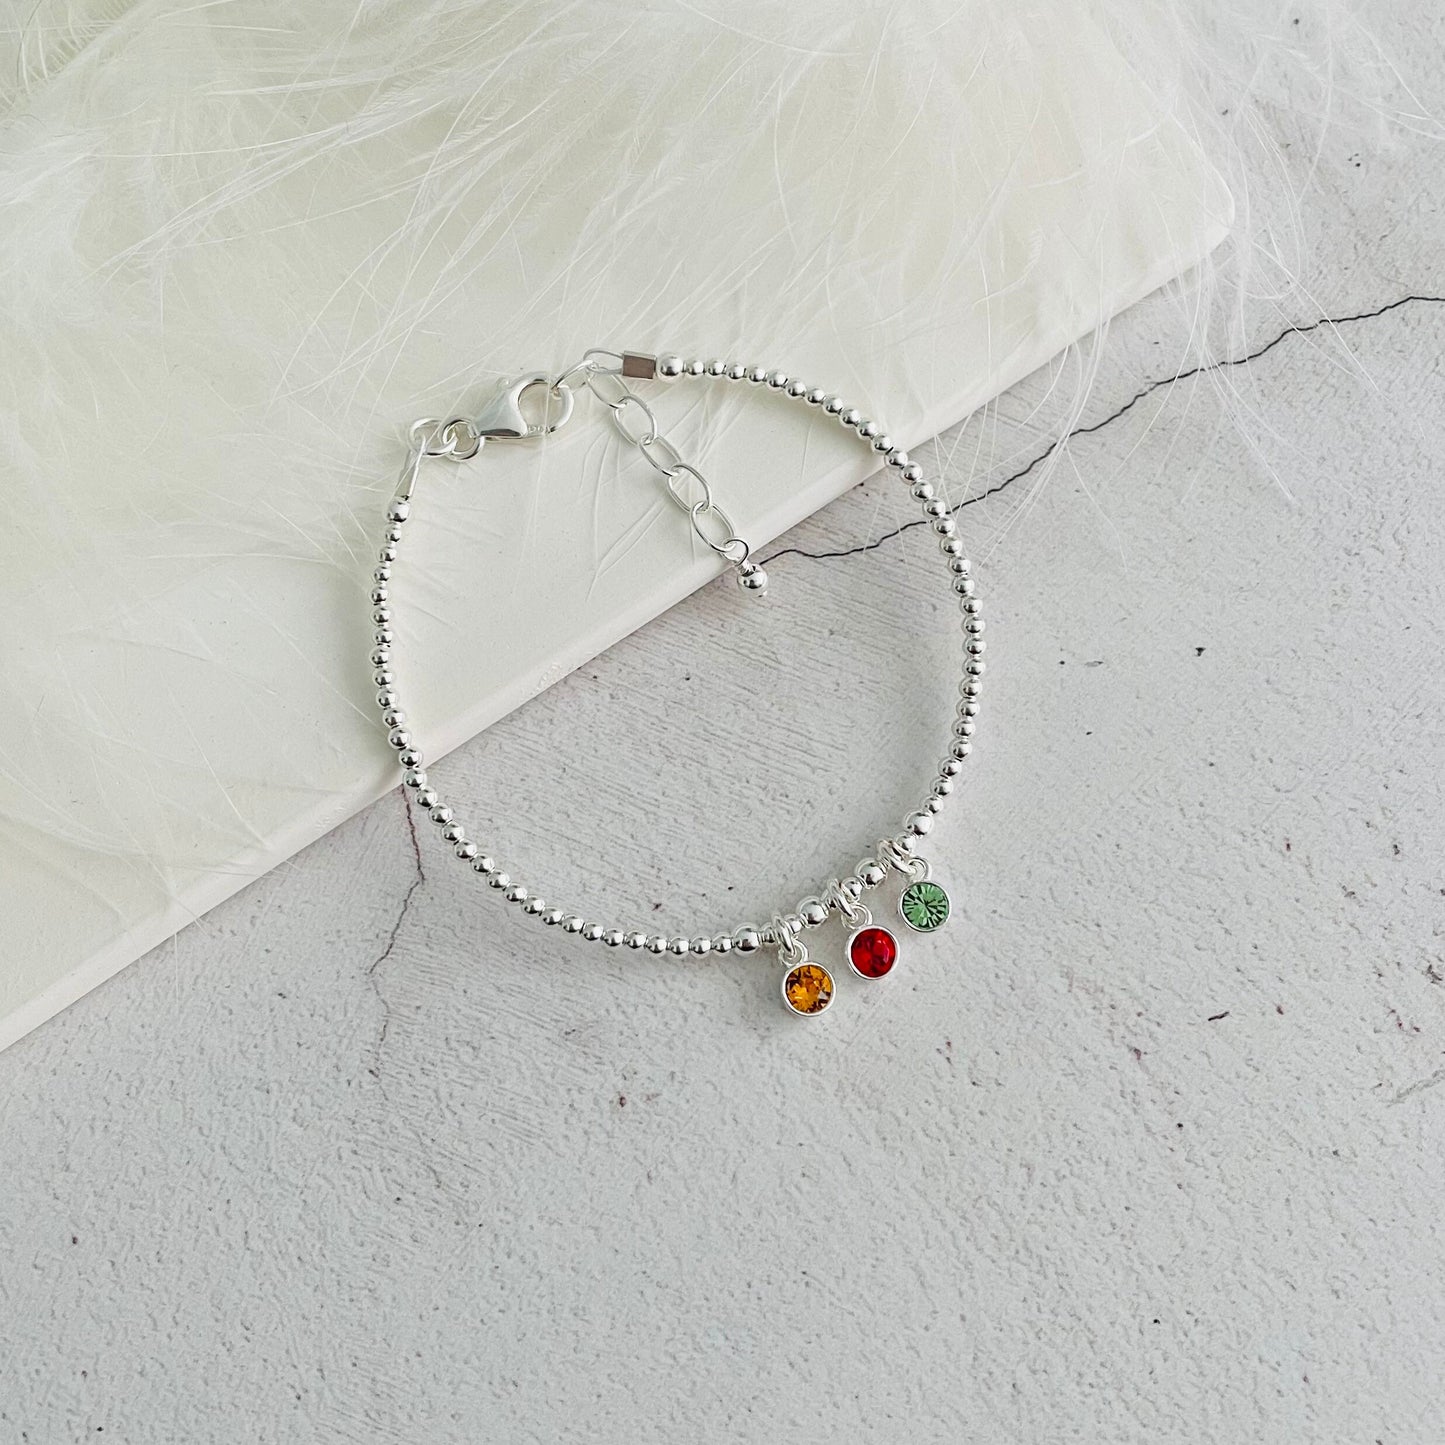 Crystal Birthstone Bracelet For Mums Mothers Day Gift, Family Birthstone Jewellery